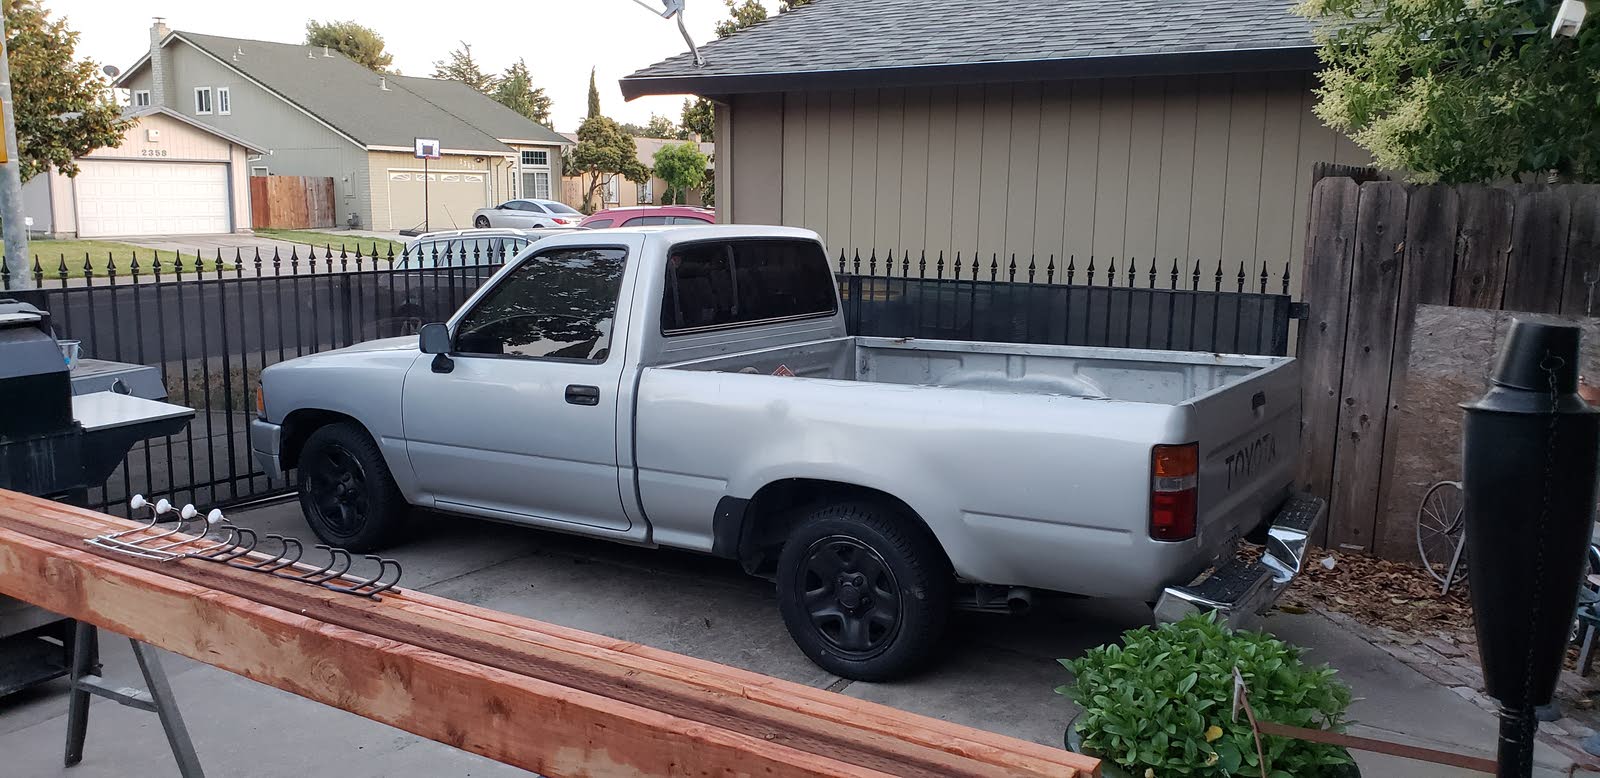 Toyota Pickup Questions - No spark - CarGurus 1992 Toyota Pickup Starts Then Dies